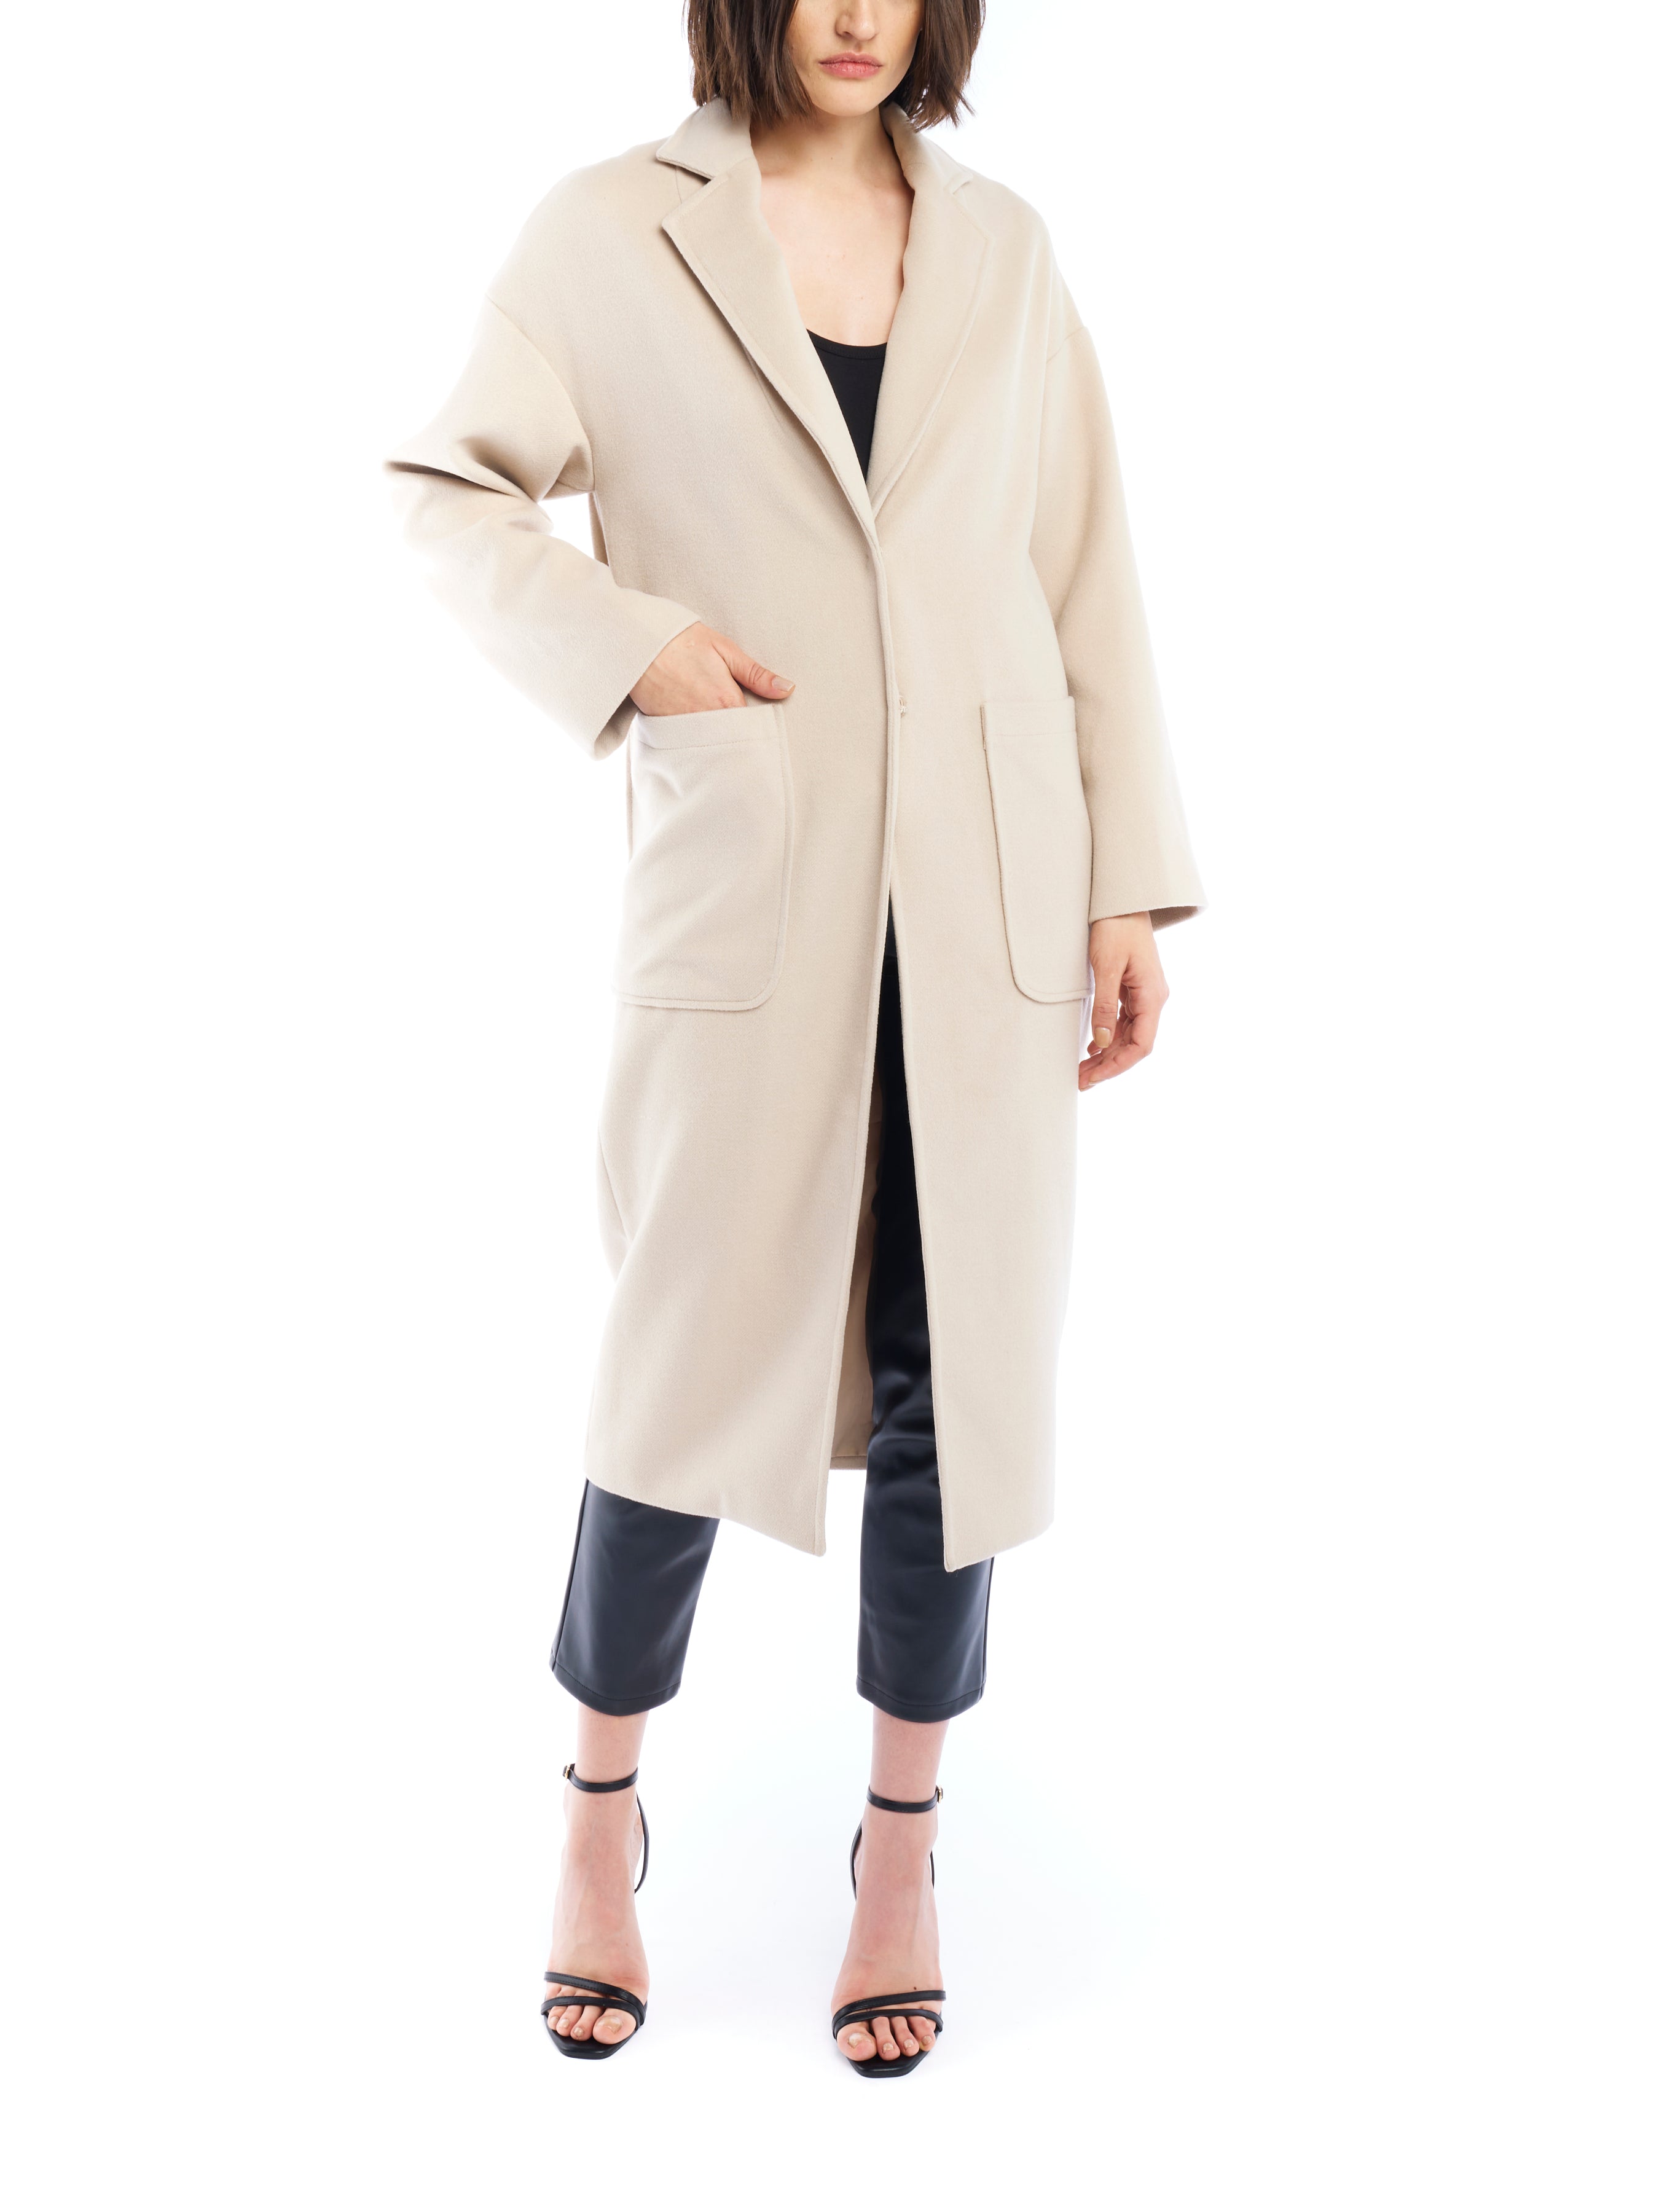 Clifton midi length jacket featuring hidden snap closure and large front pockets in taupe - front